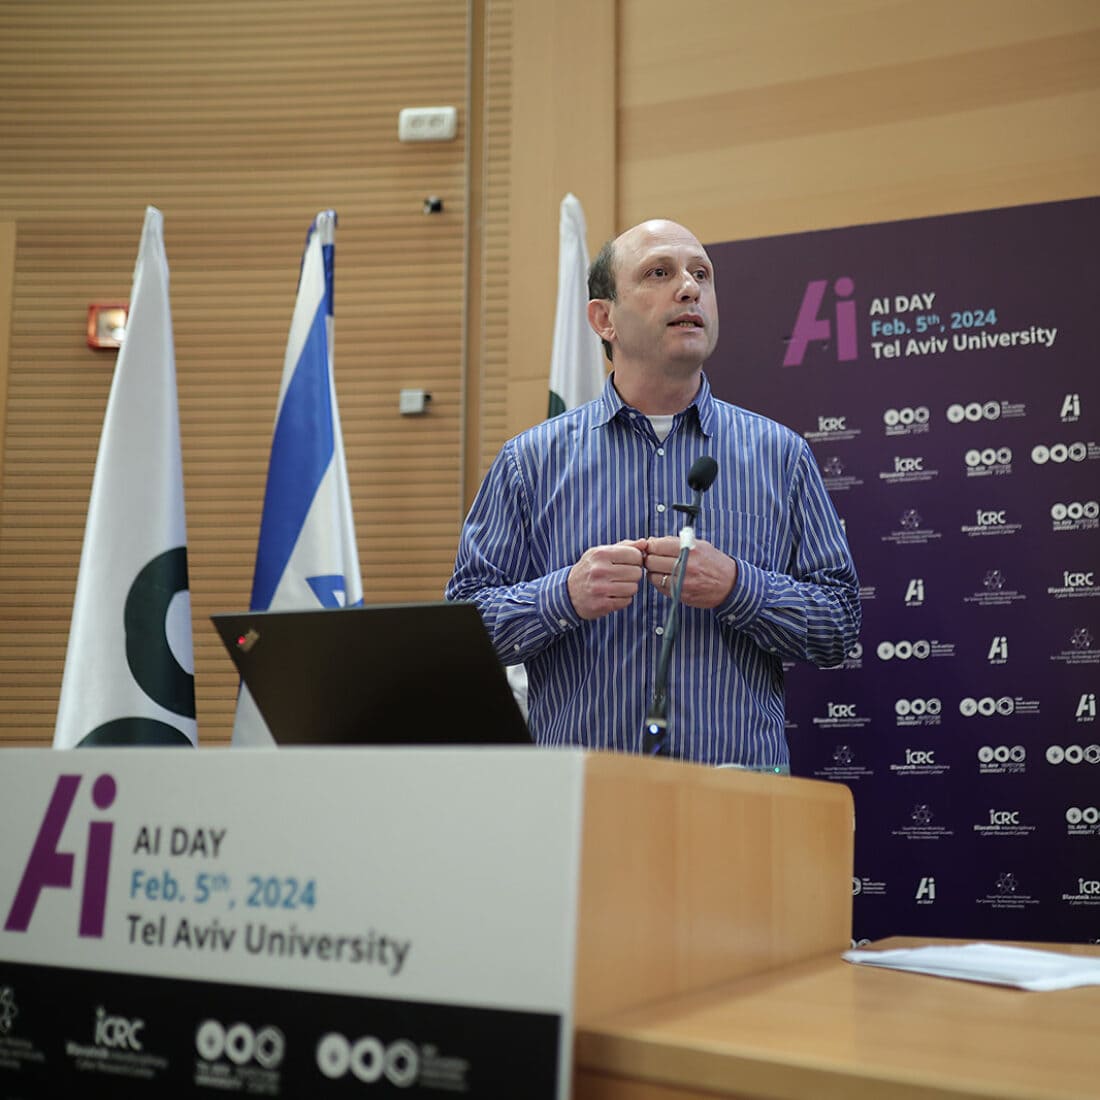 Tel Aviv University Prof. Noam Shomron speaking about AI and resilience at AI Day at Tel Aviv University. Photo by Dror Sithakol